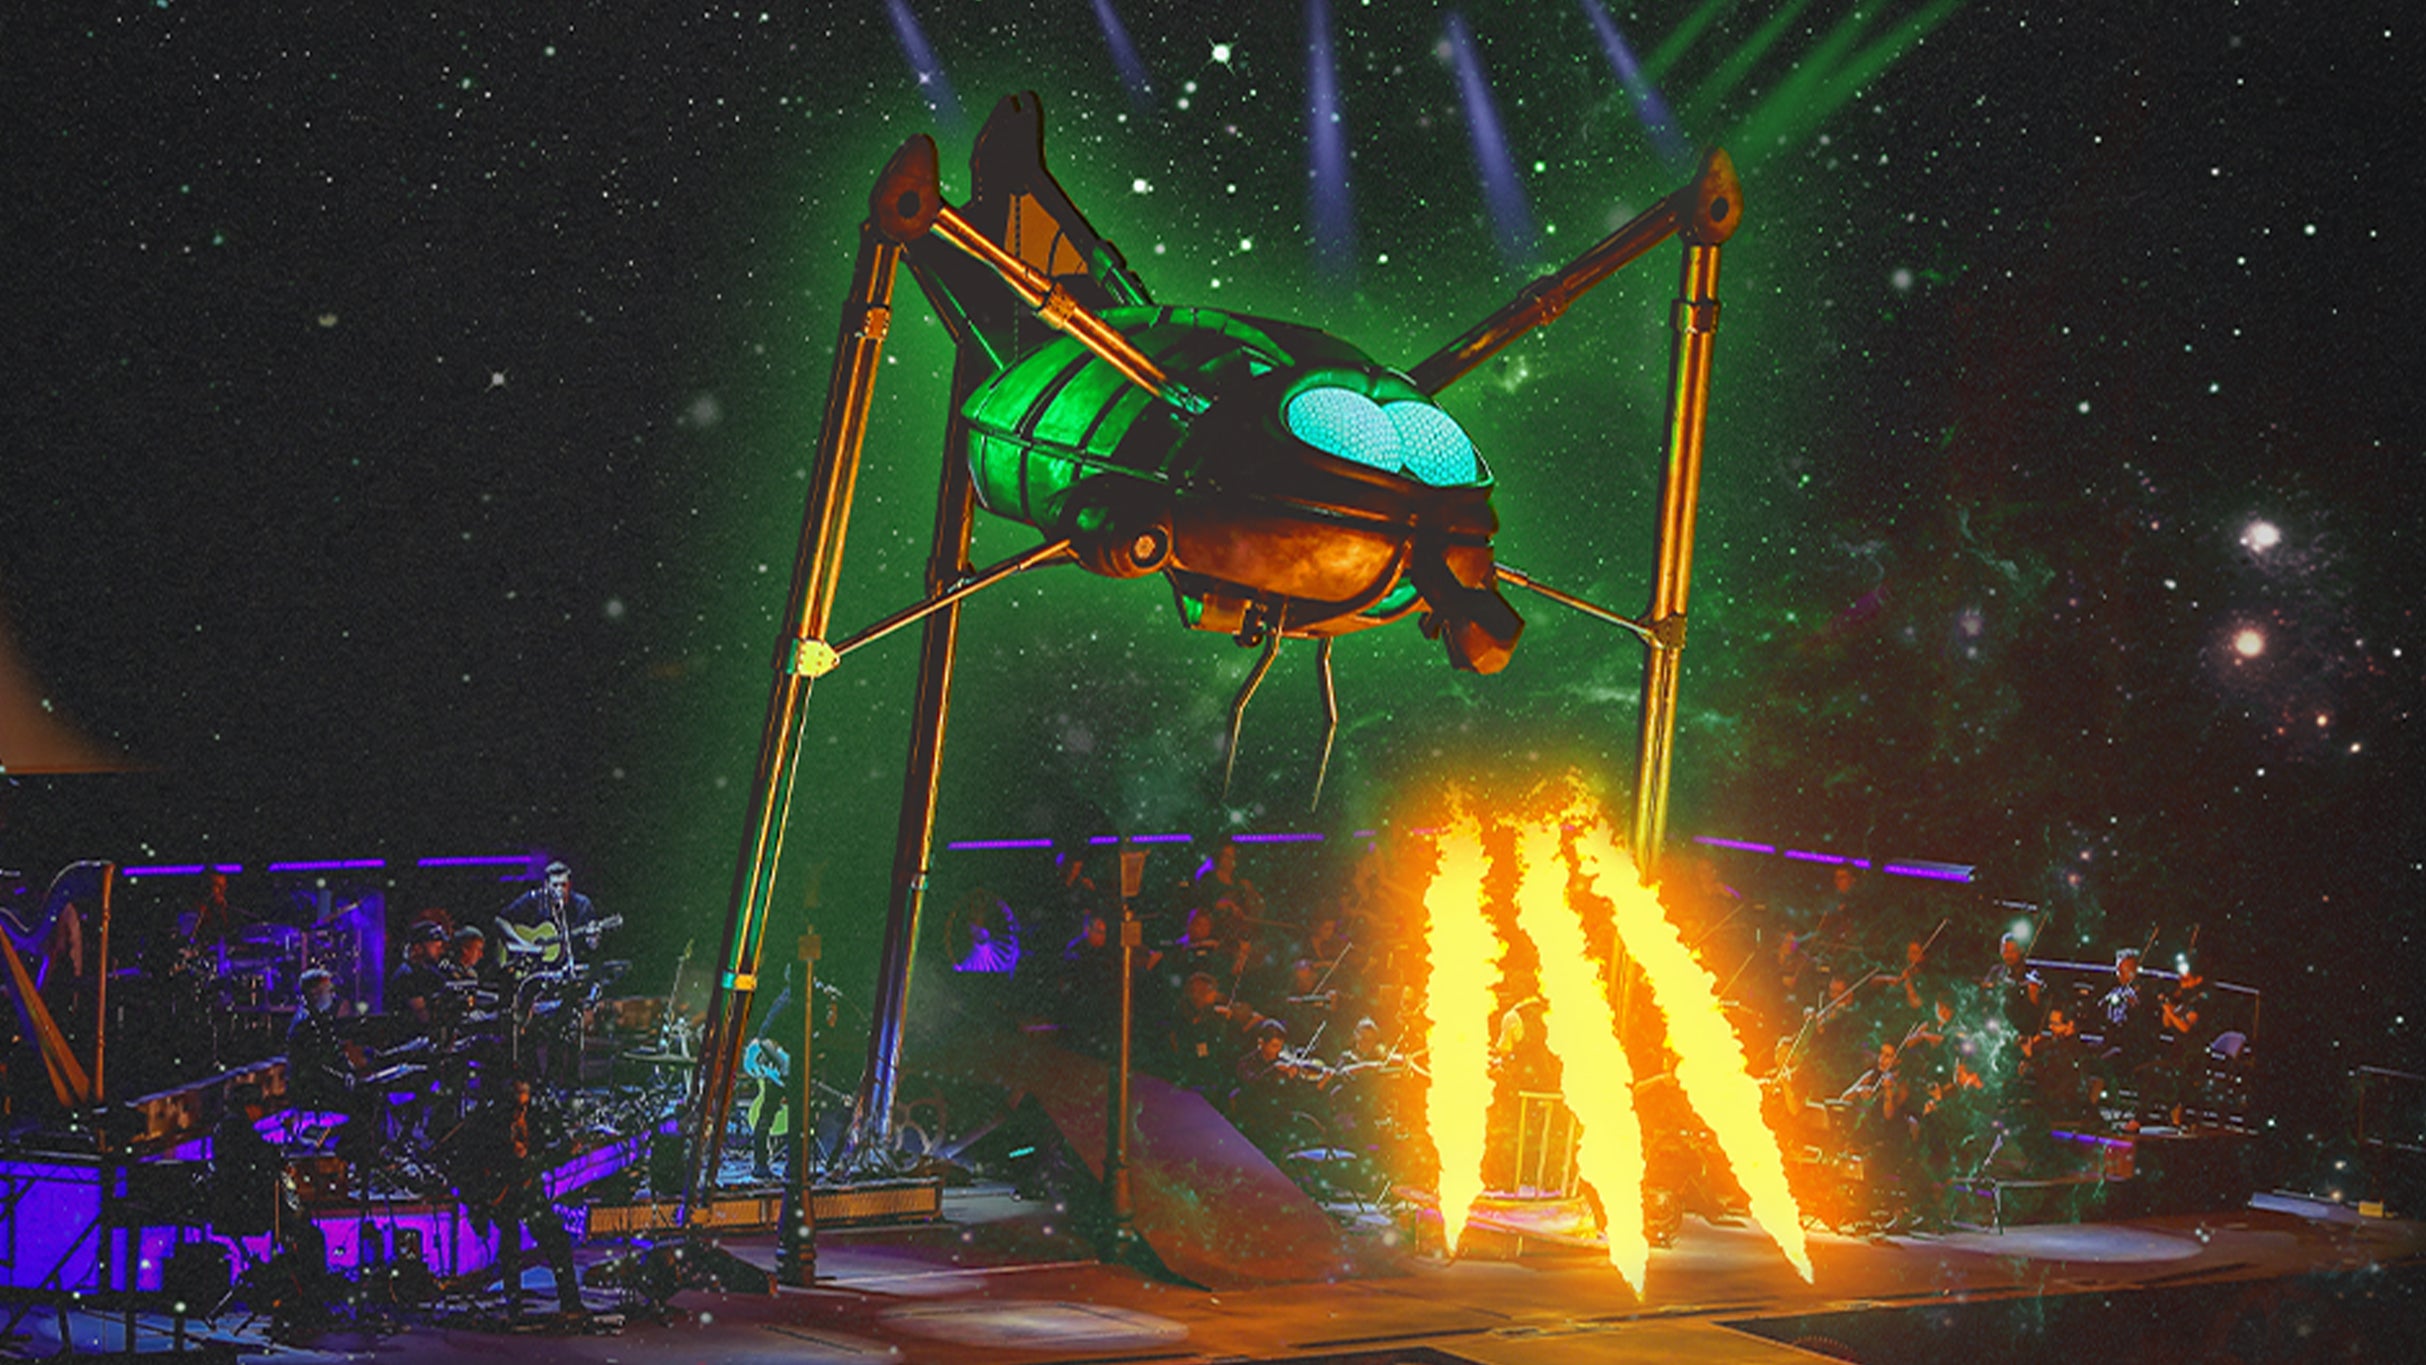 Jeff Wayne's the War of the Worlds - Alive On Stage! in Aberdeen promo photo for Ticketmaster presale offer code